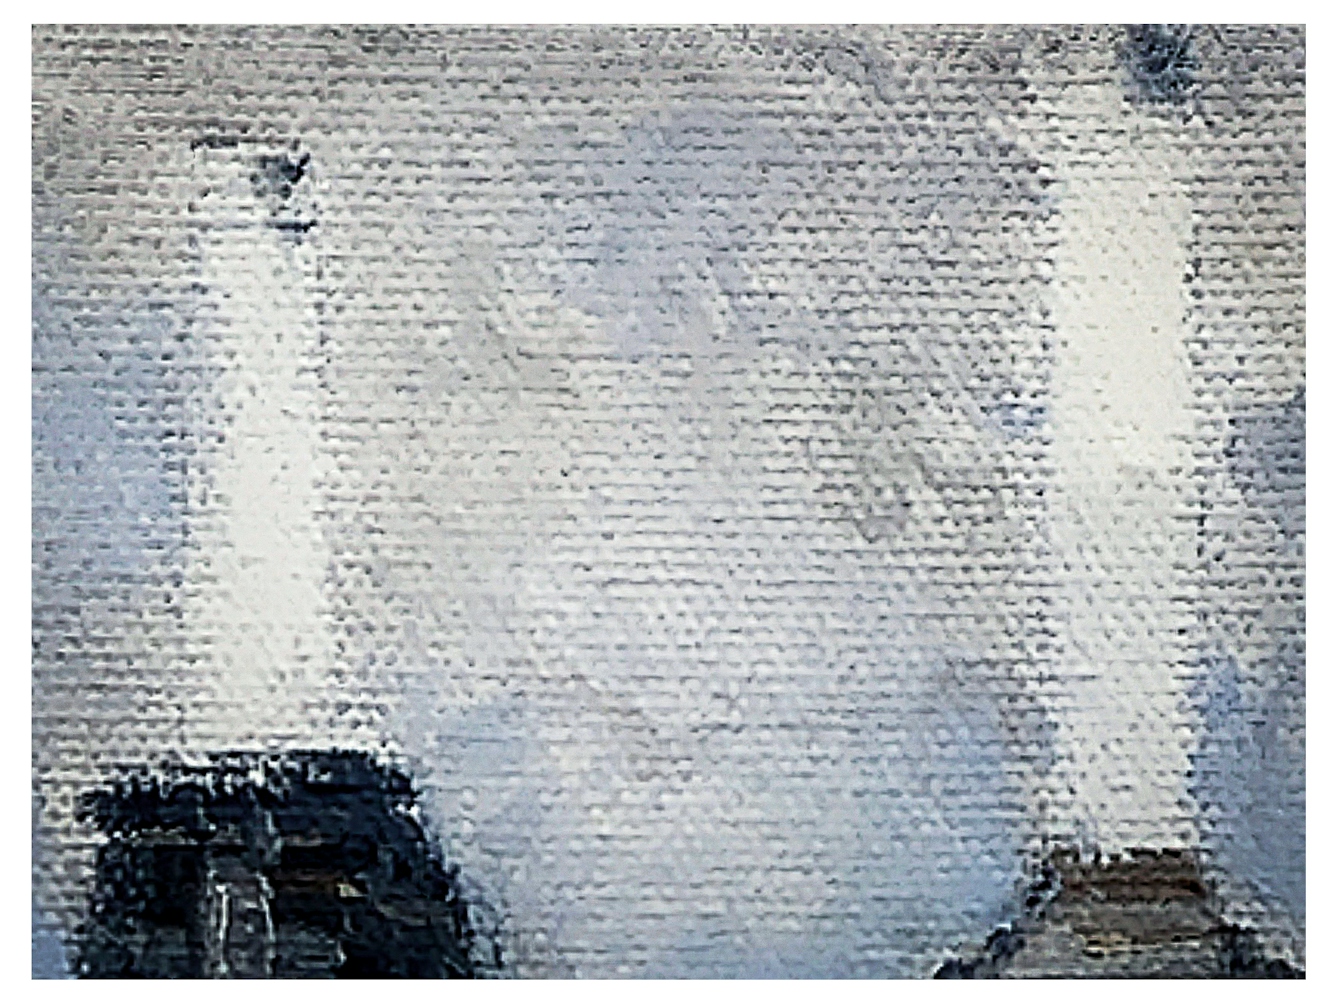 Photograph of a detail of a larger oil on canvas painting. The painting has been created with bold, think, textured brush strokes in a semi-abstract manner. The scene depicted is of Battersea Power Station in London with its distinct tall white chimneys. The sky behind the white chimney stacks is blue peppered with grey and white clouds.